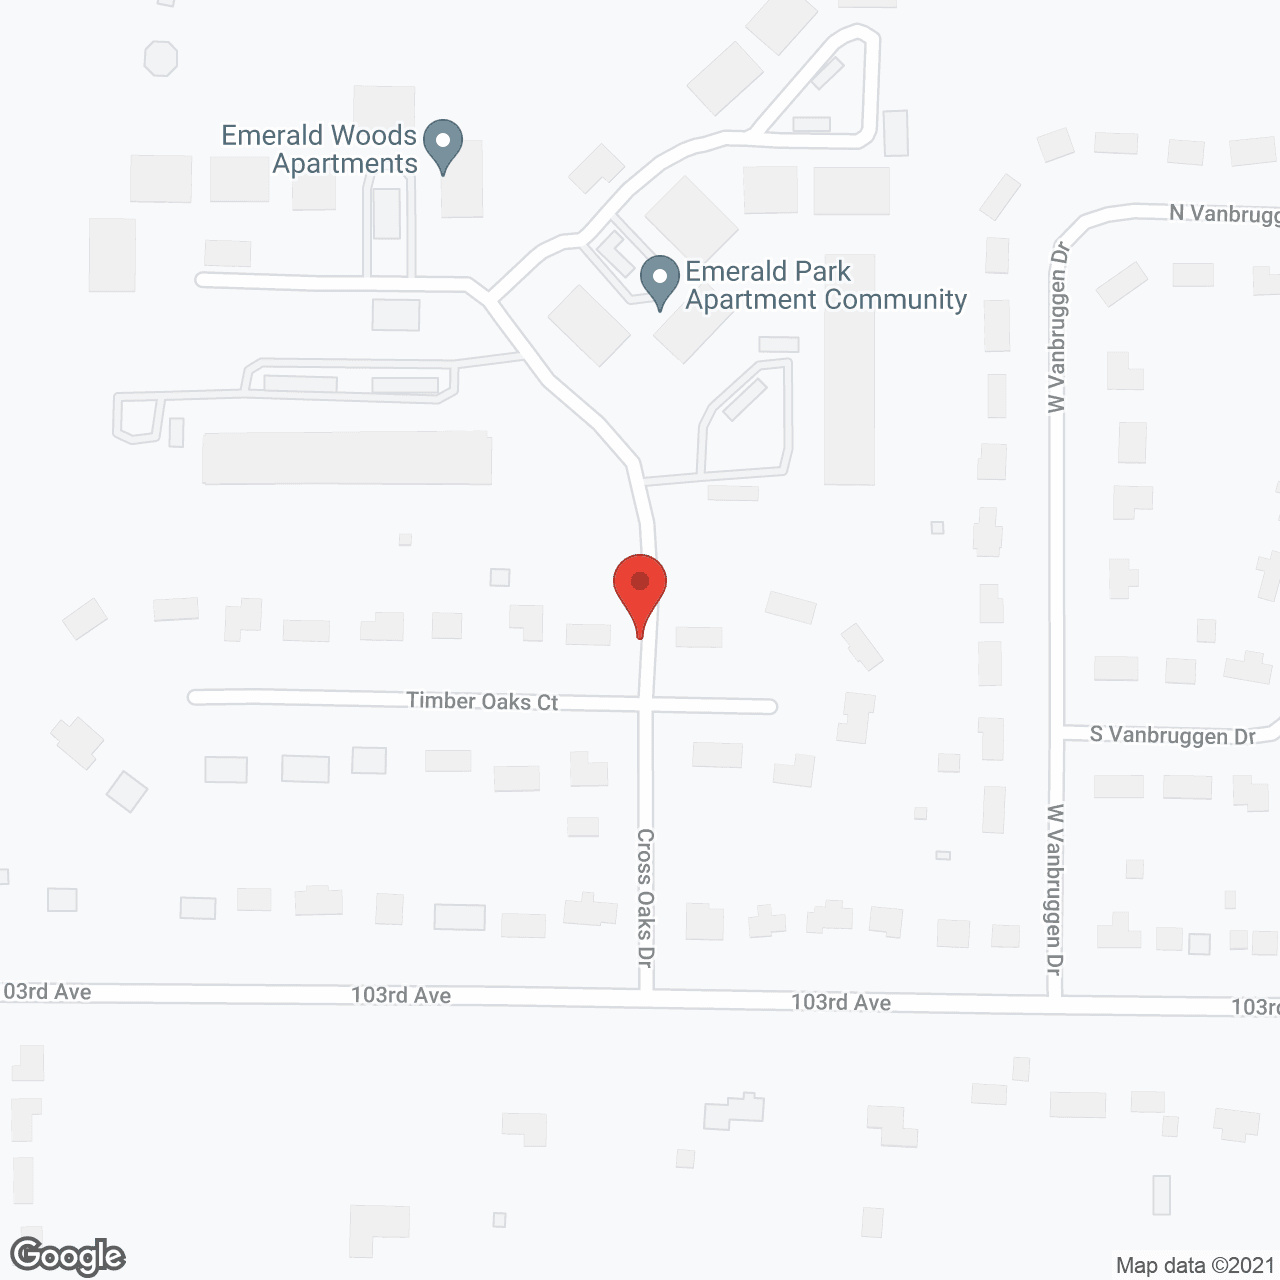 Emerald Park Apartments in google map